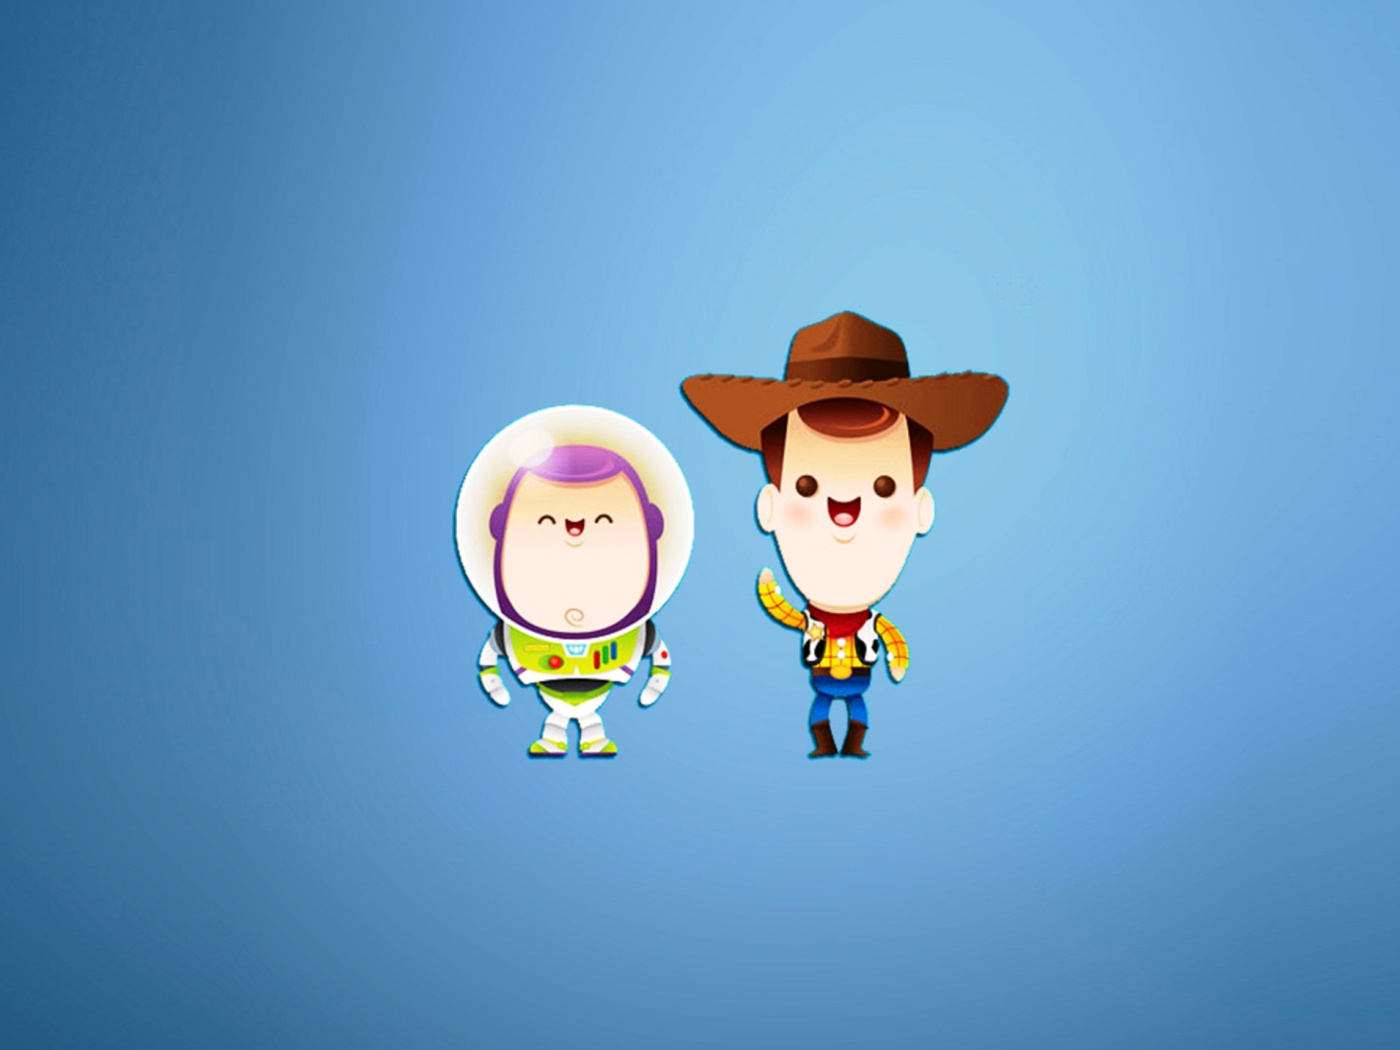 Das Buzz and Woody in Toy Story Wallpaper 1400x1050